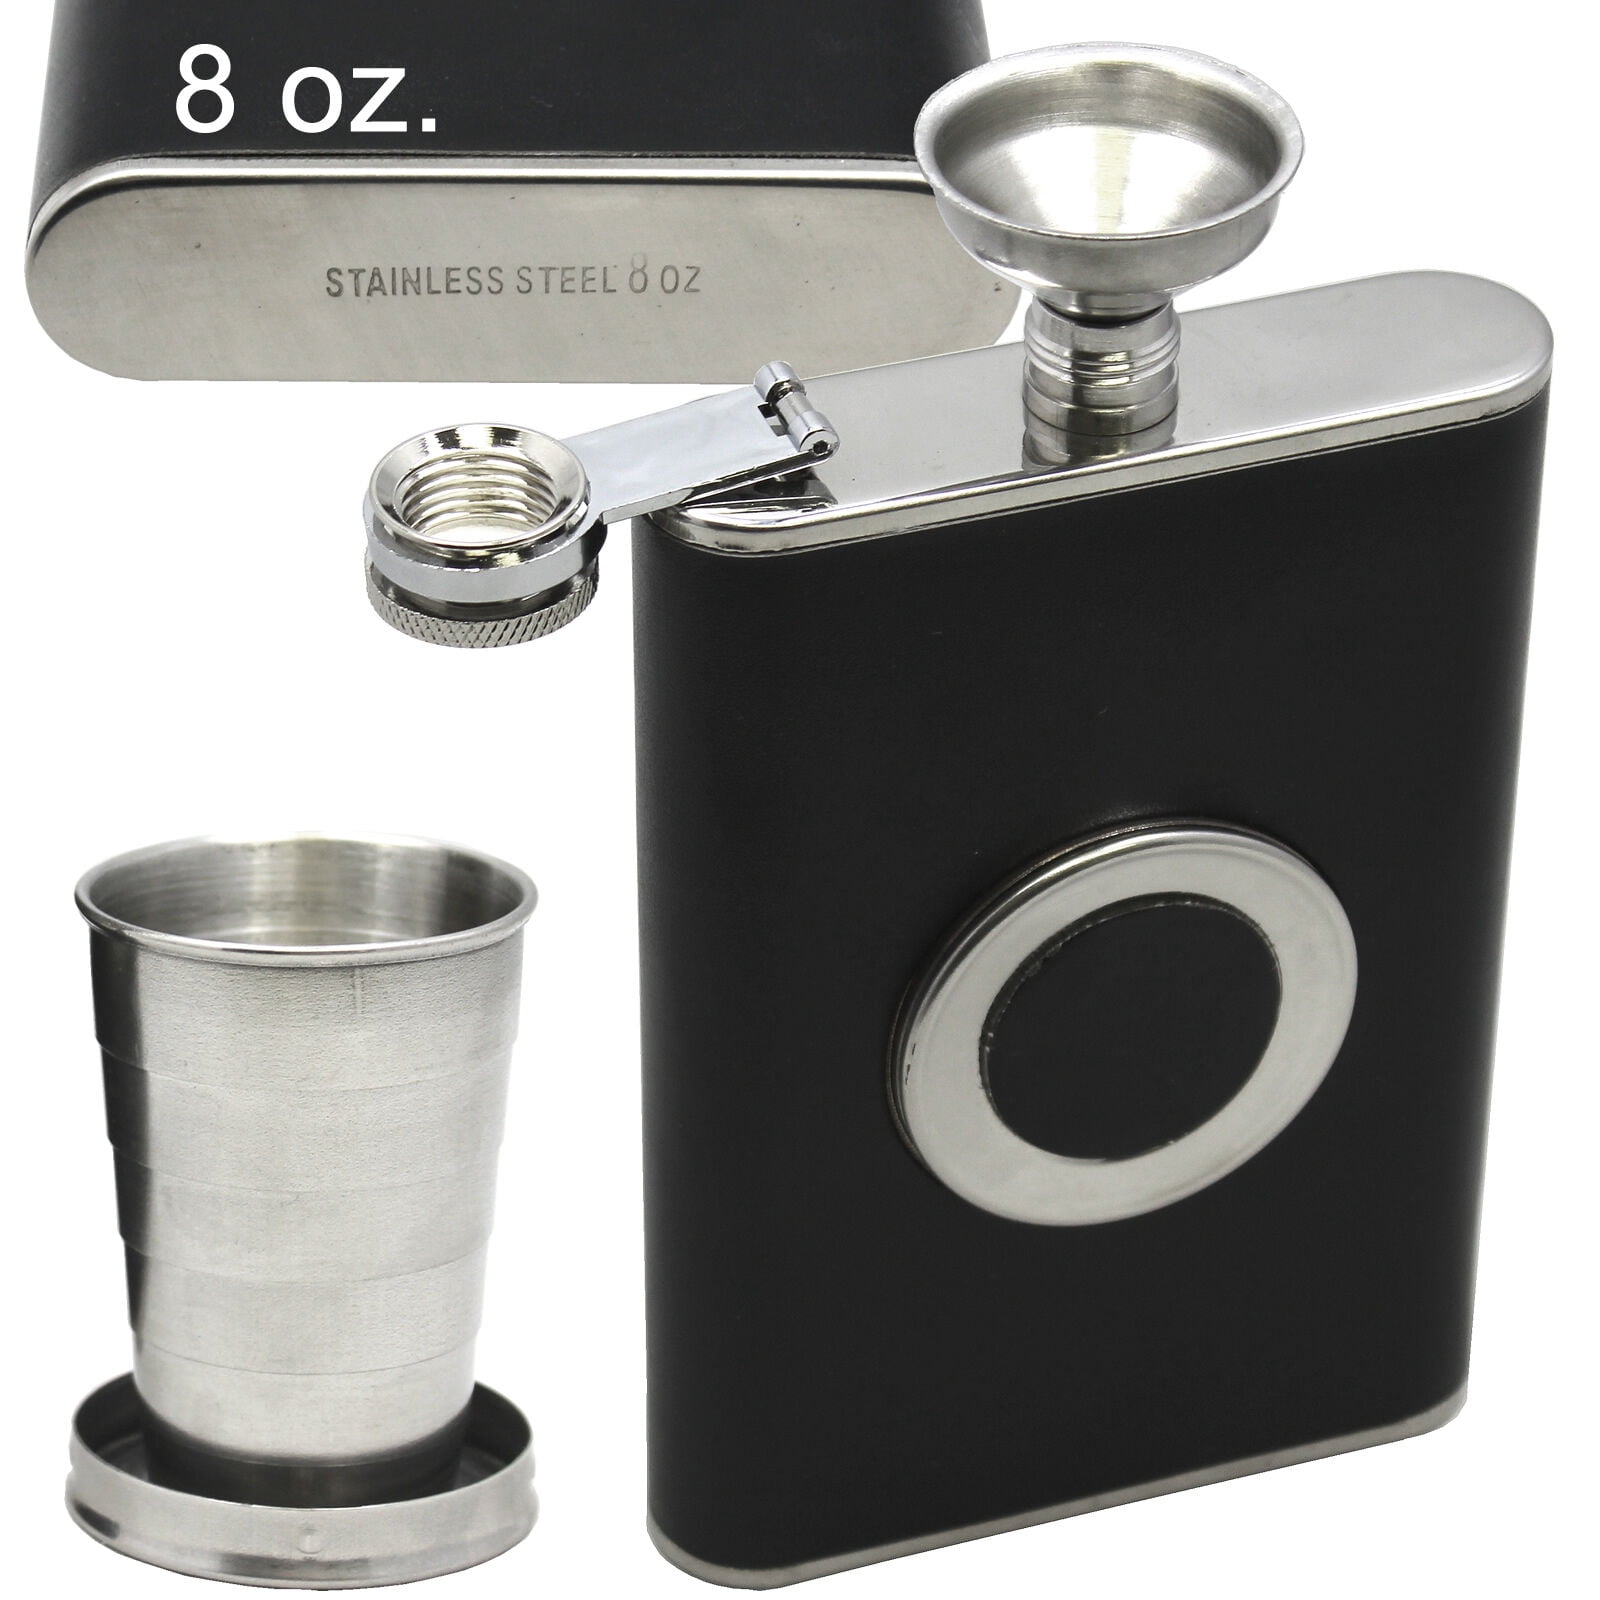 Black FLASK Builtin Collapsible SHOT GLASS Stainless Steel Screw Cap Hip Pocket 